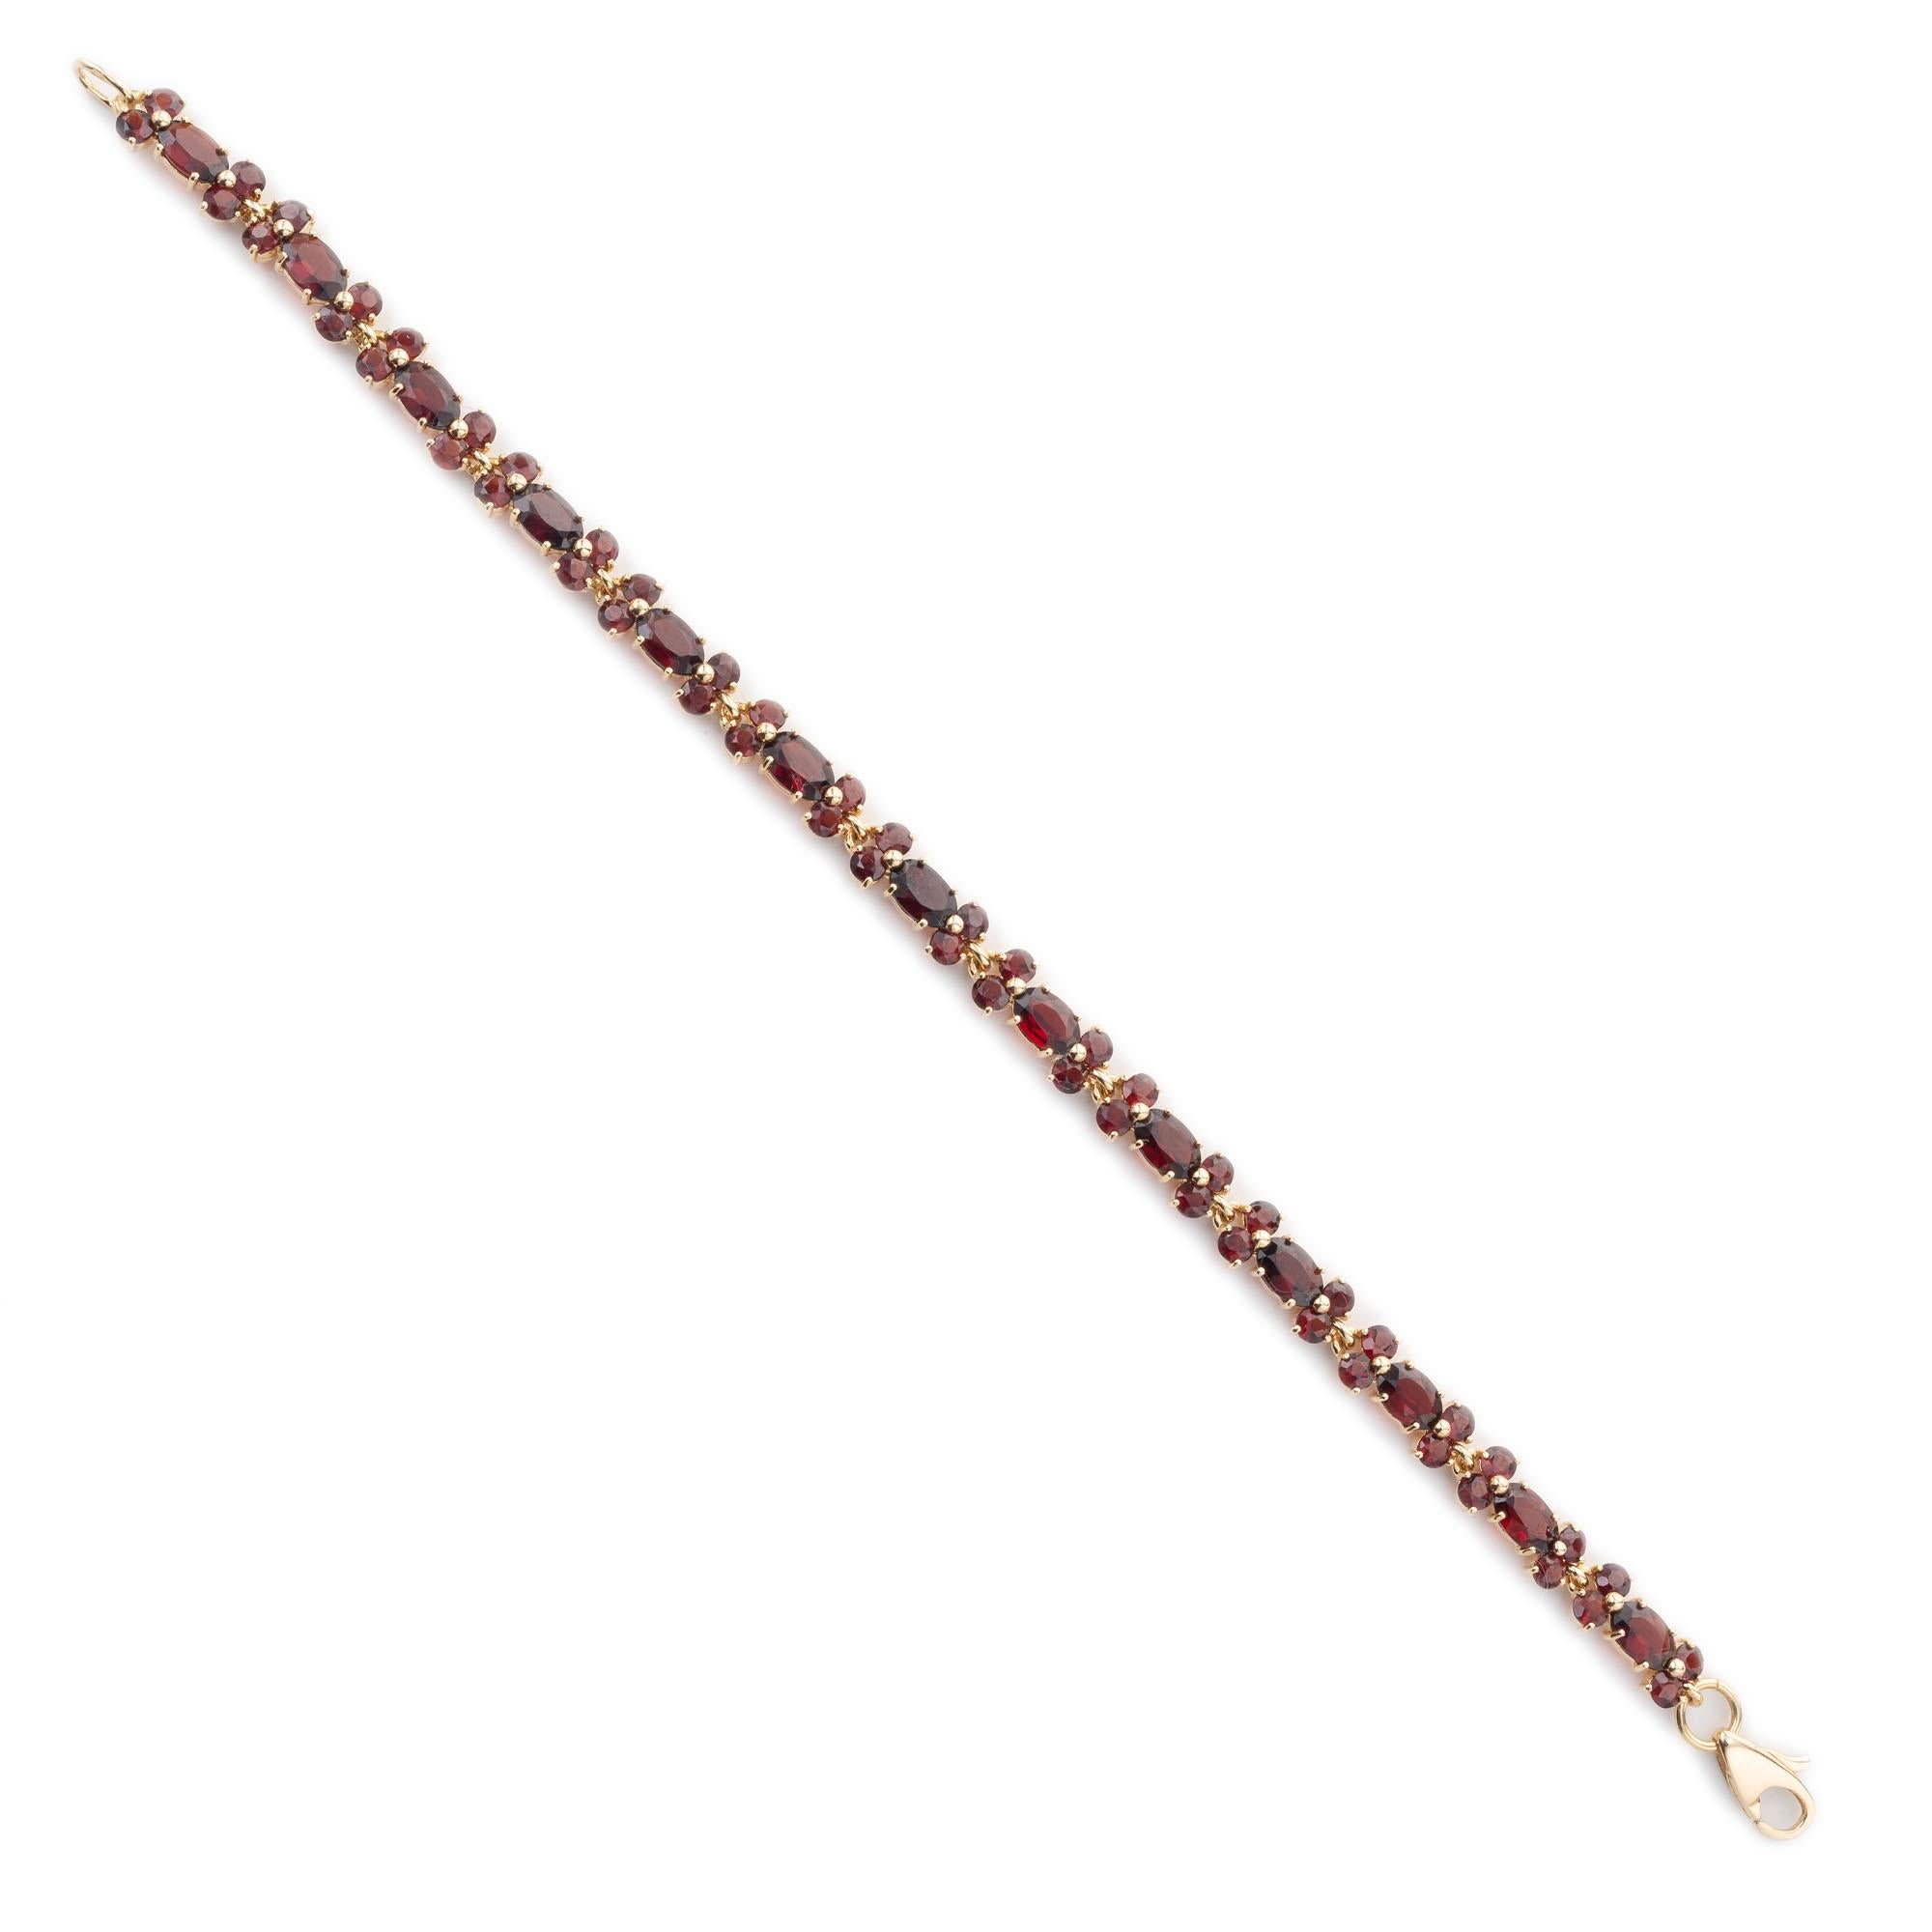 Garnet bracelet in solid 18k yellow gold. 13 oval garnets with 53 round garnet separators. 7.5 inches long. 

13 oval brownish red garnets, approx.  3.00cts
53 round brownish red garnets, approx. 2.50cts
18k yellow gold 
Stamped: 750
11.1